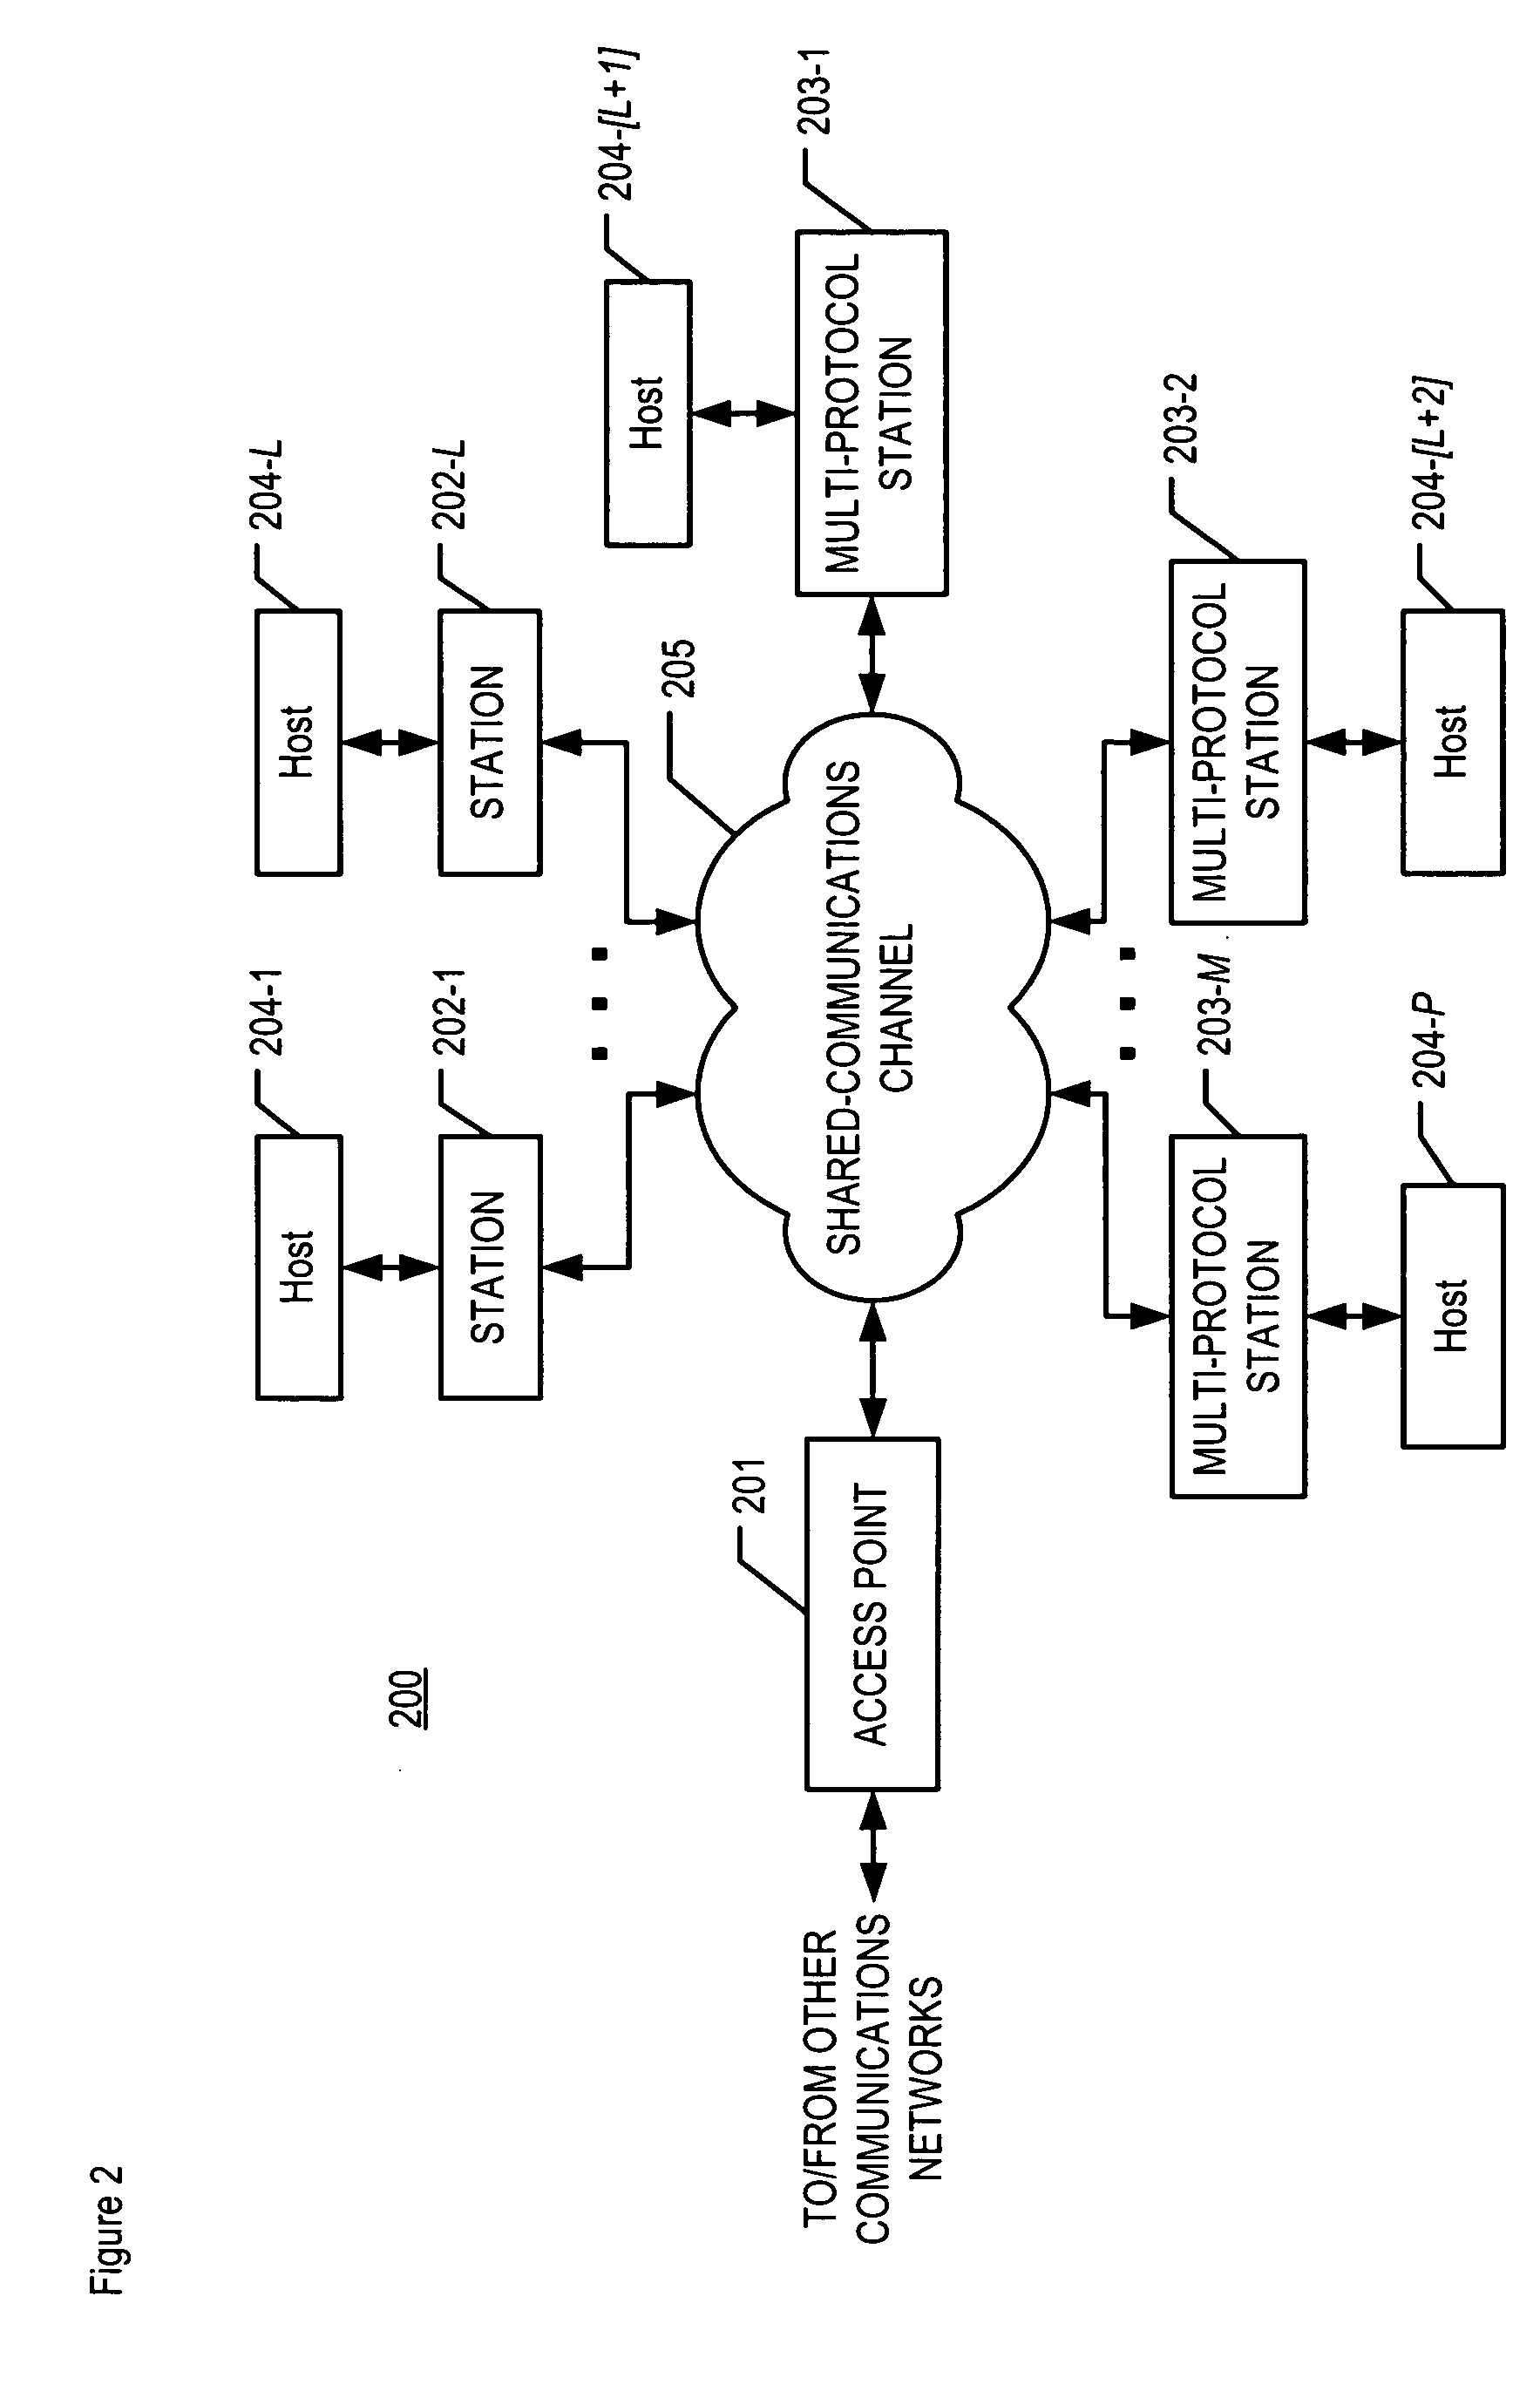 Managing an access point in the presence of separate protocols that share the same communications channel